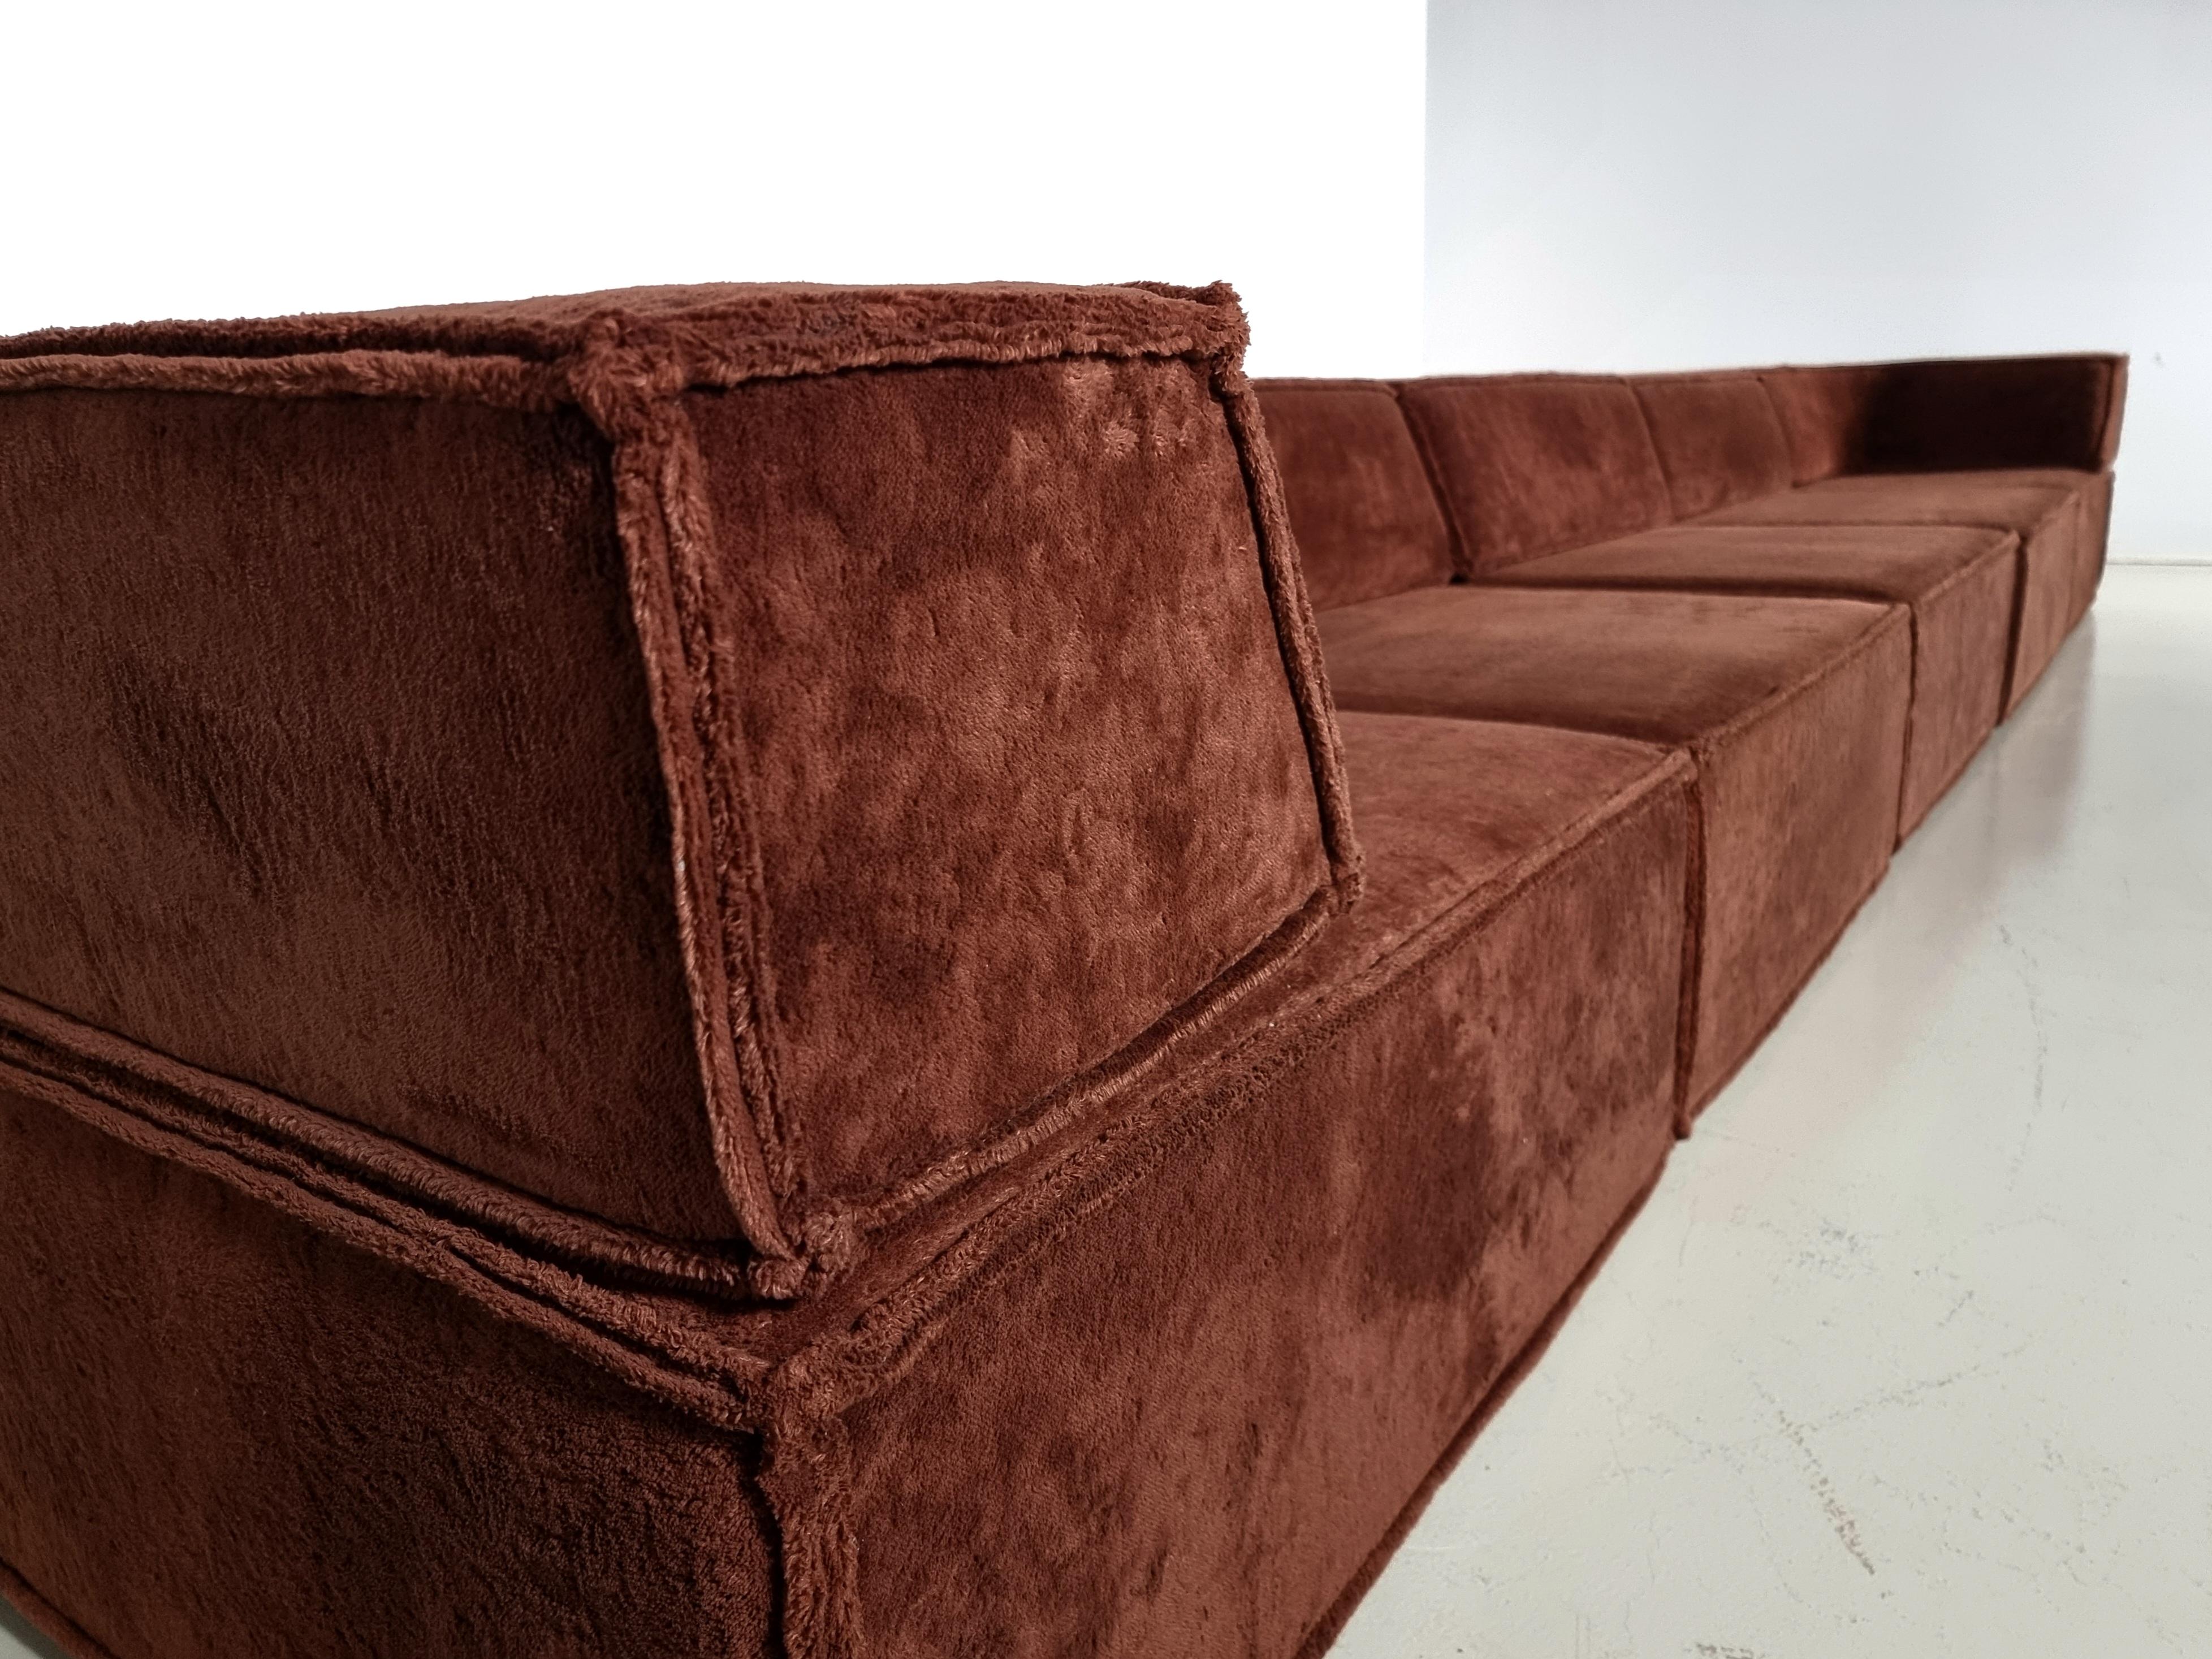 COR Trio Sofa by Team Form Ag in brown original fabric, COR Furniture, Germany 6